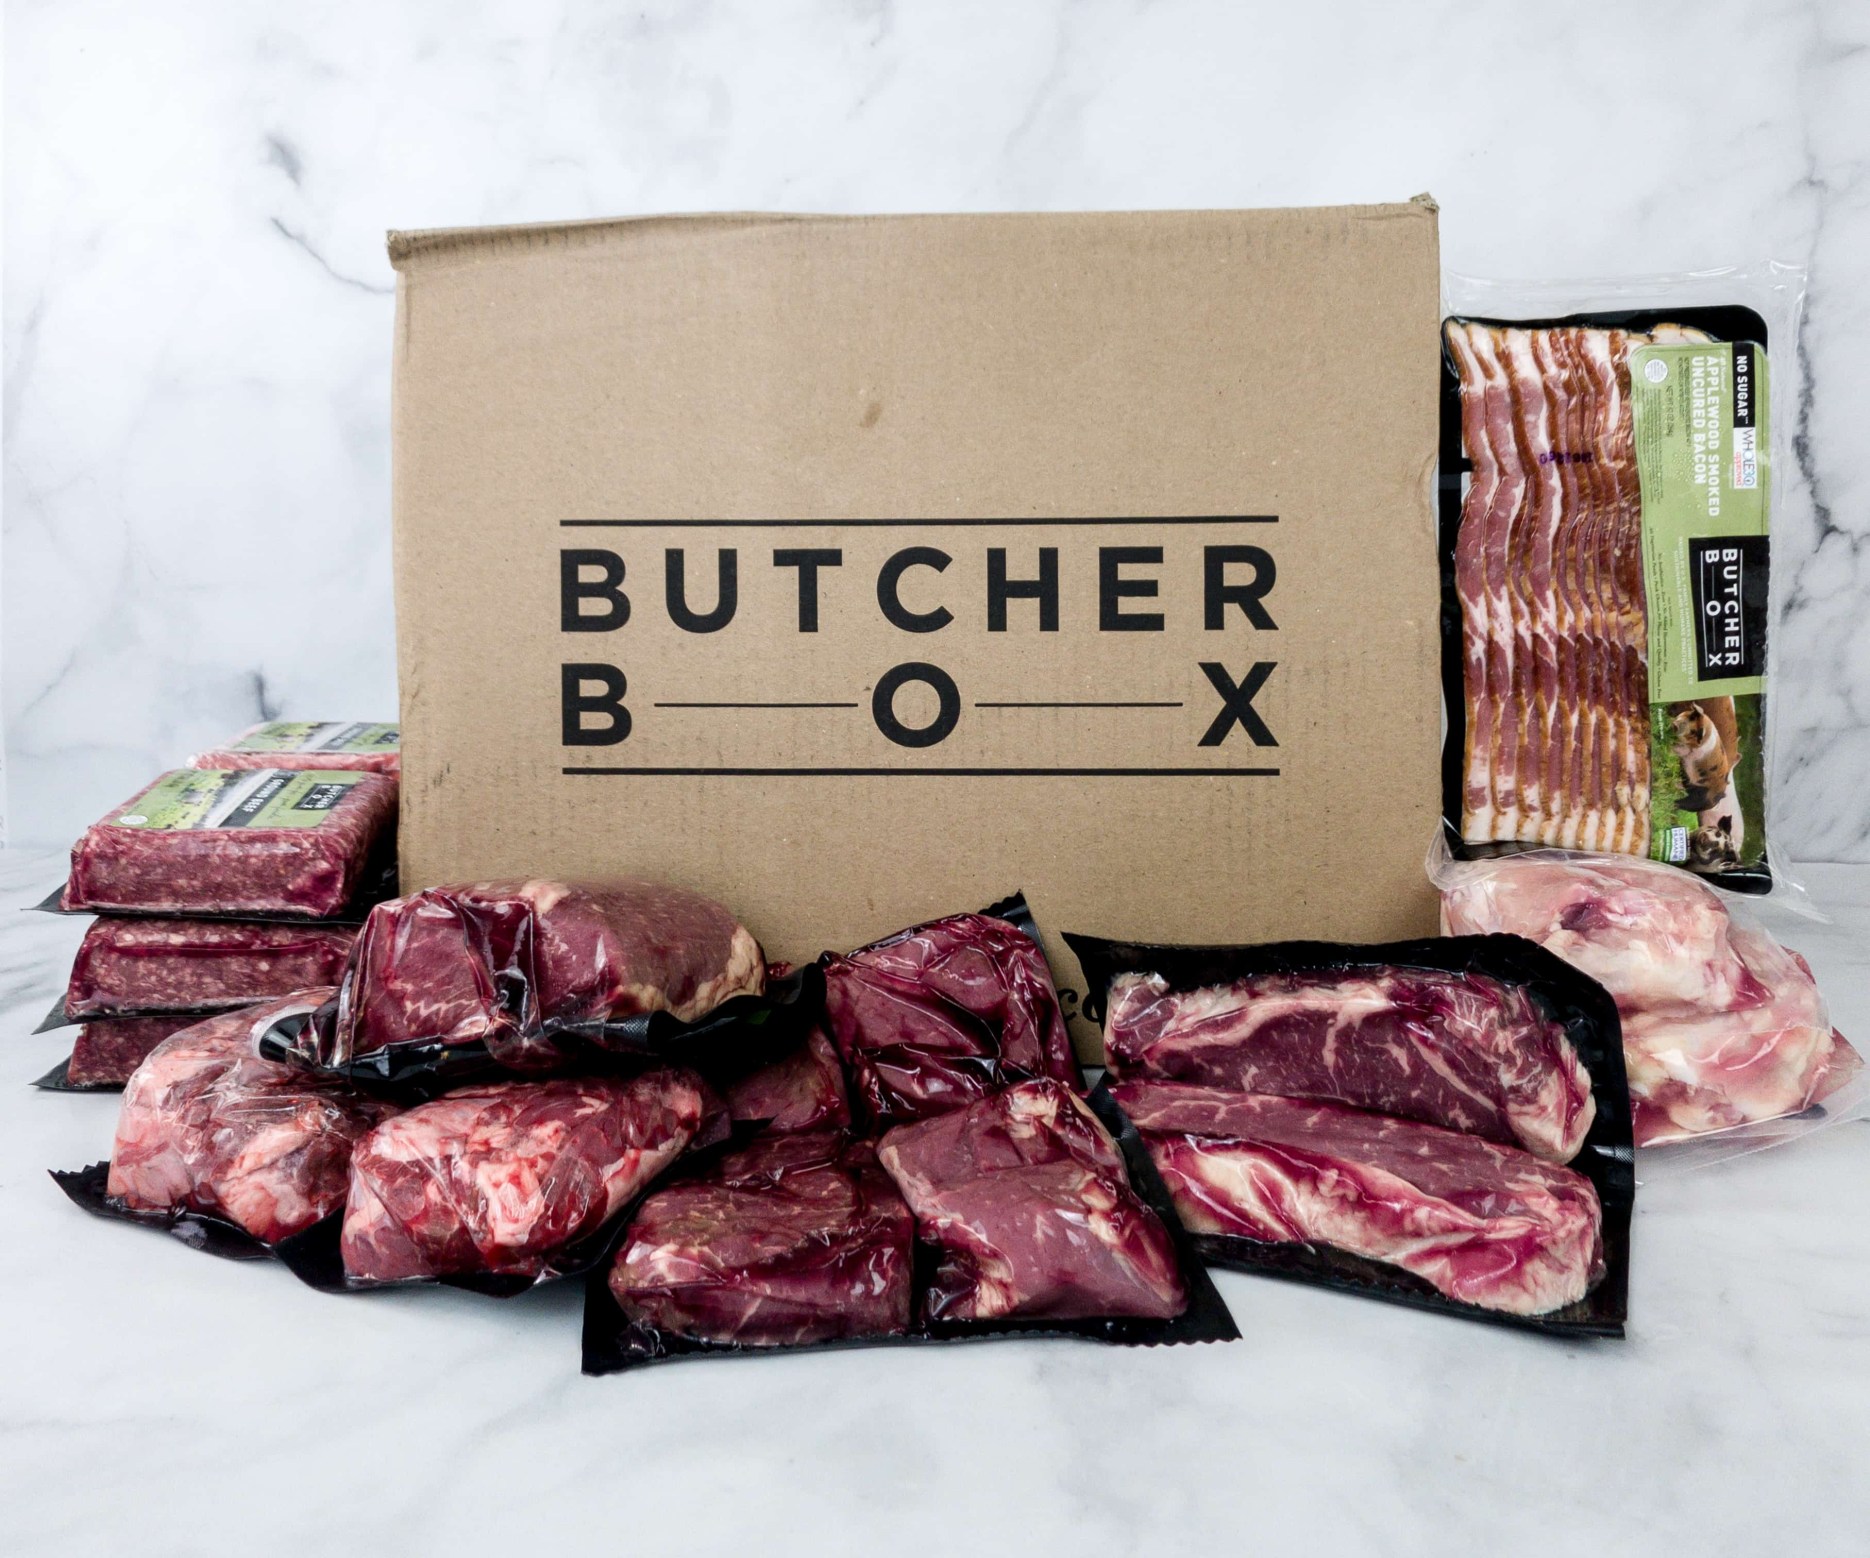 Butcher Box Reviews Get All The Details At Hello Subscription!